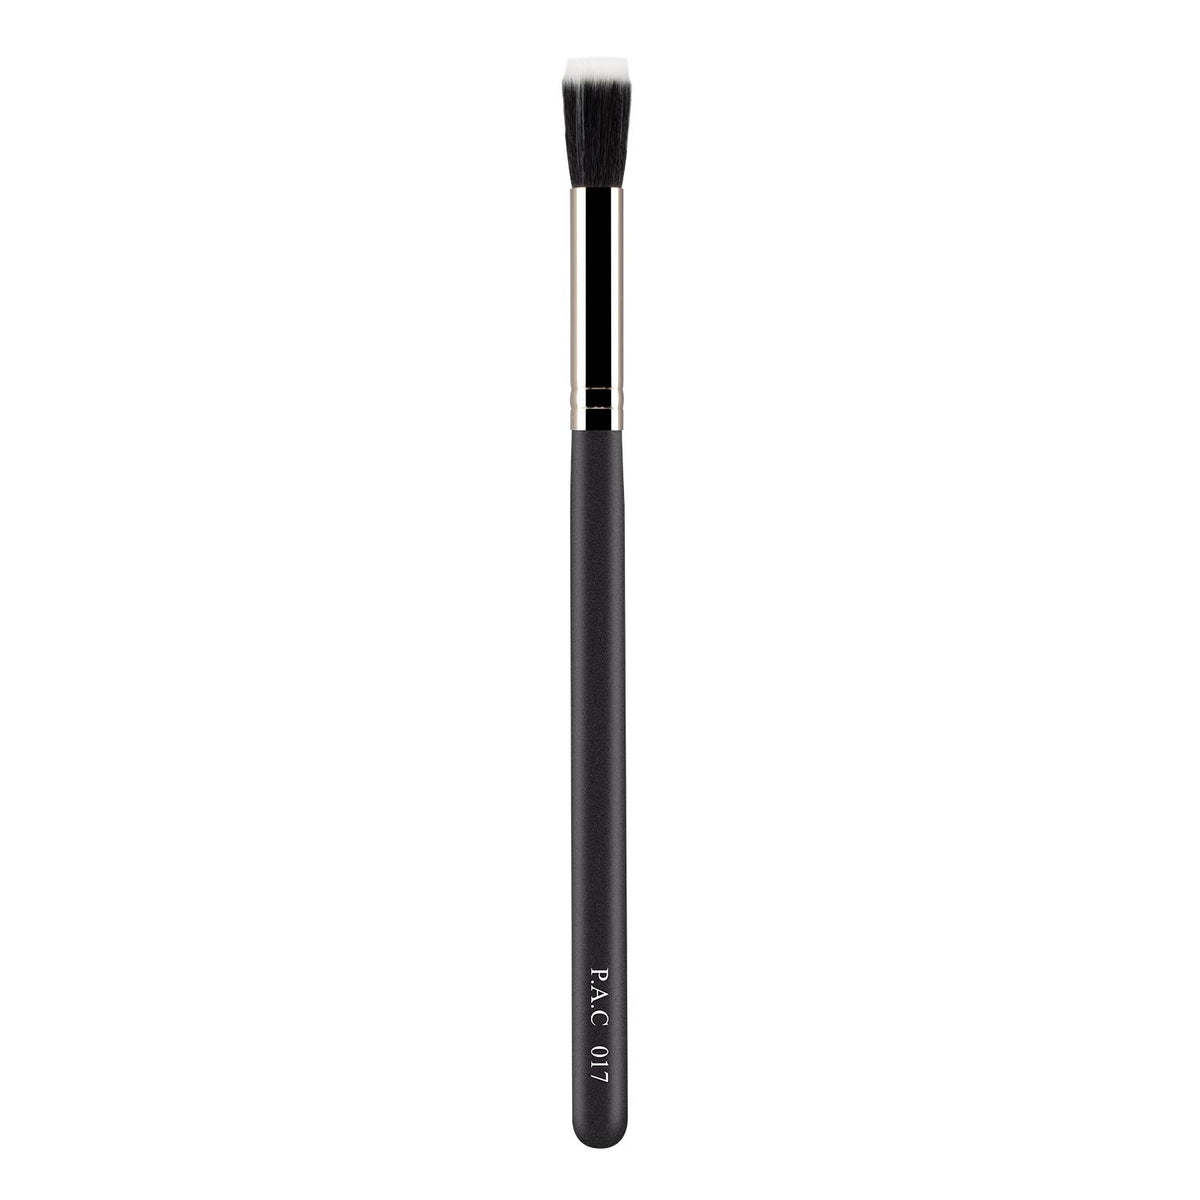 PAC Concealer Brush 017 PAC